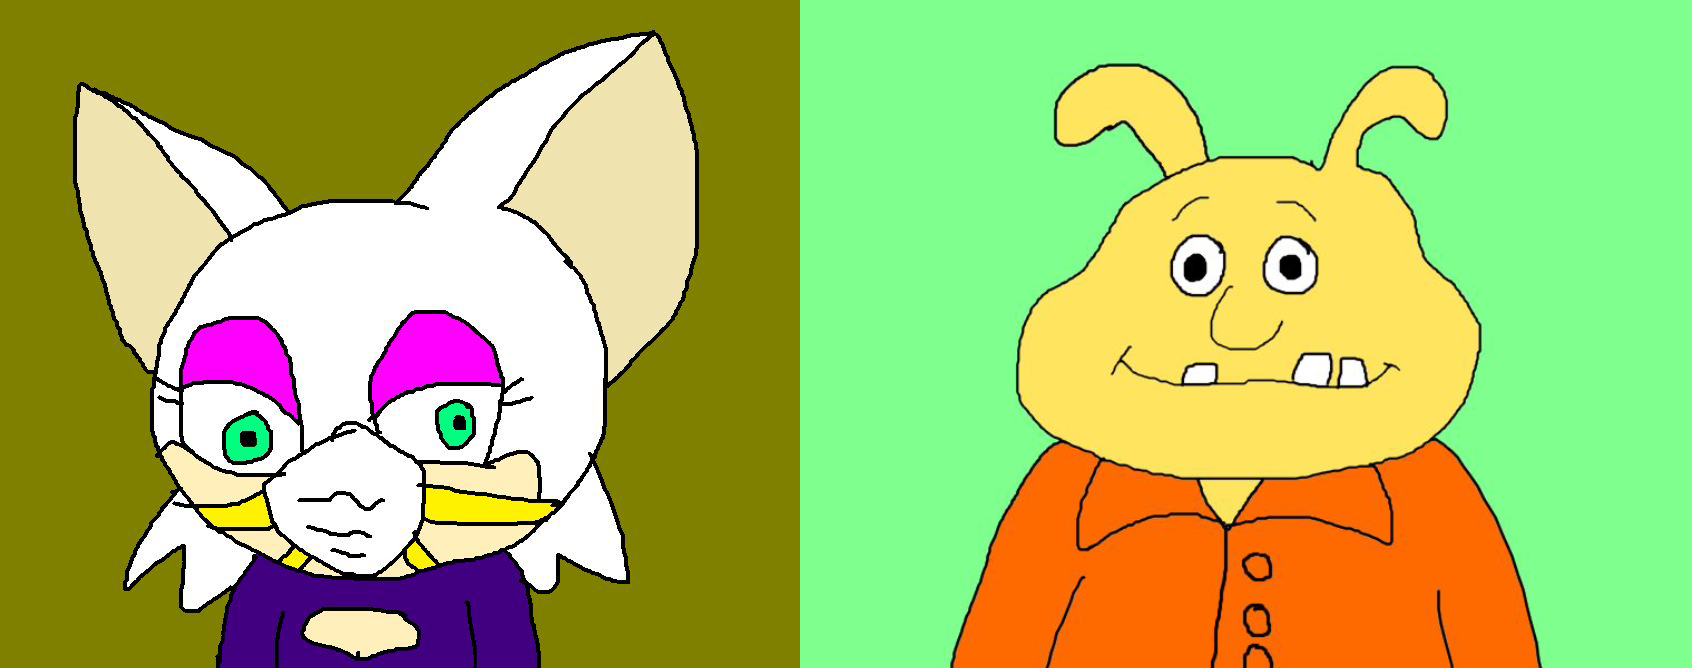 Are you sure to choose Rouge or Binky.png  by shwapneel1999